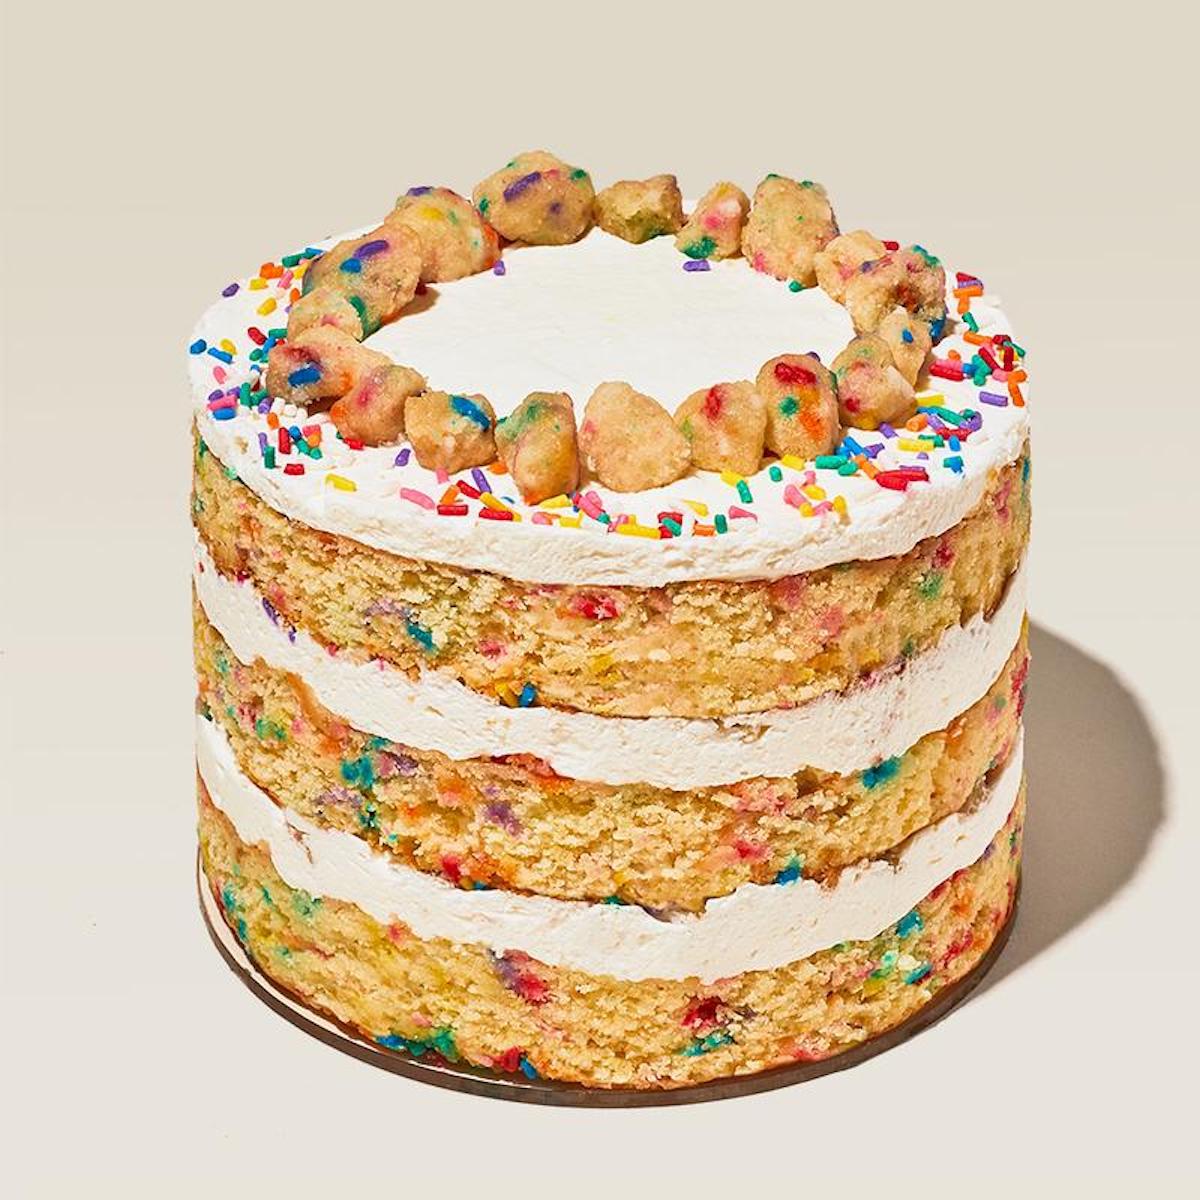 Need Cake For Delivery? Celebrate With Our 12 Faves!